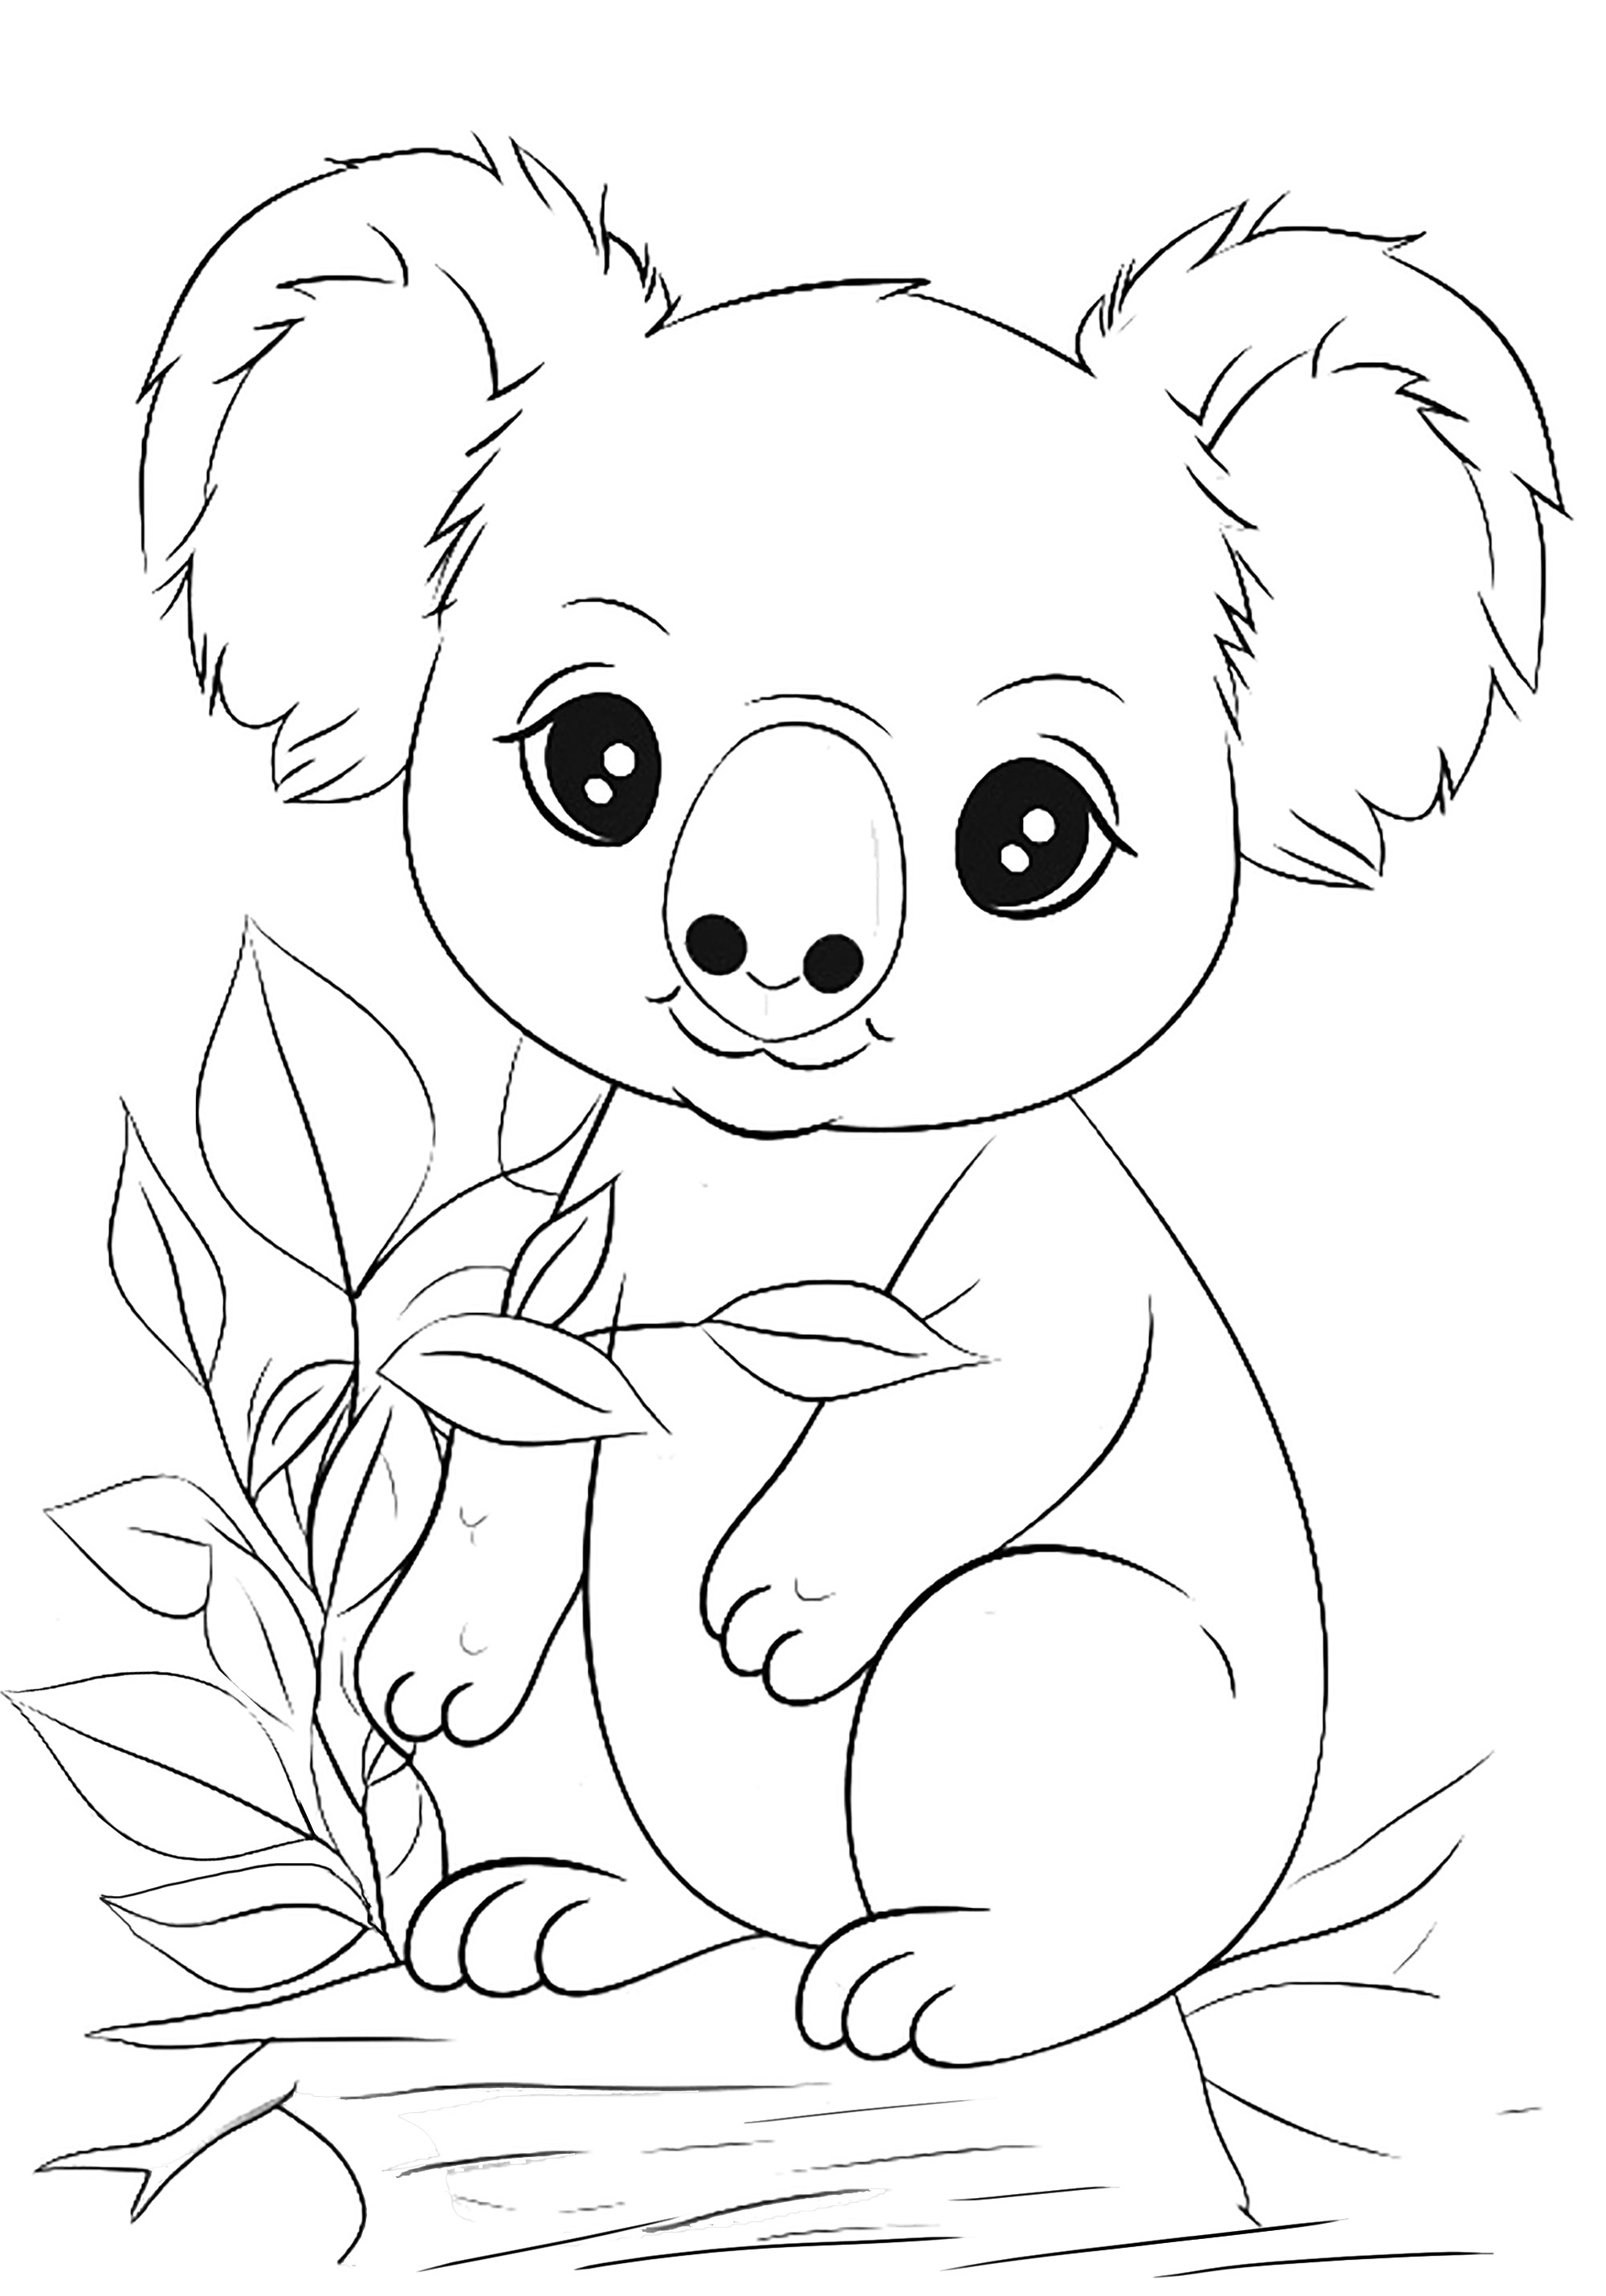 Koala coloring page with bamboo leaves